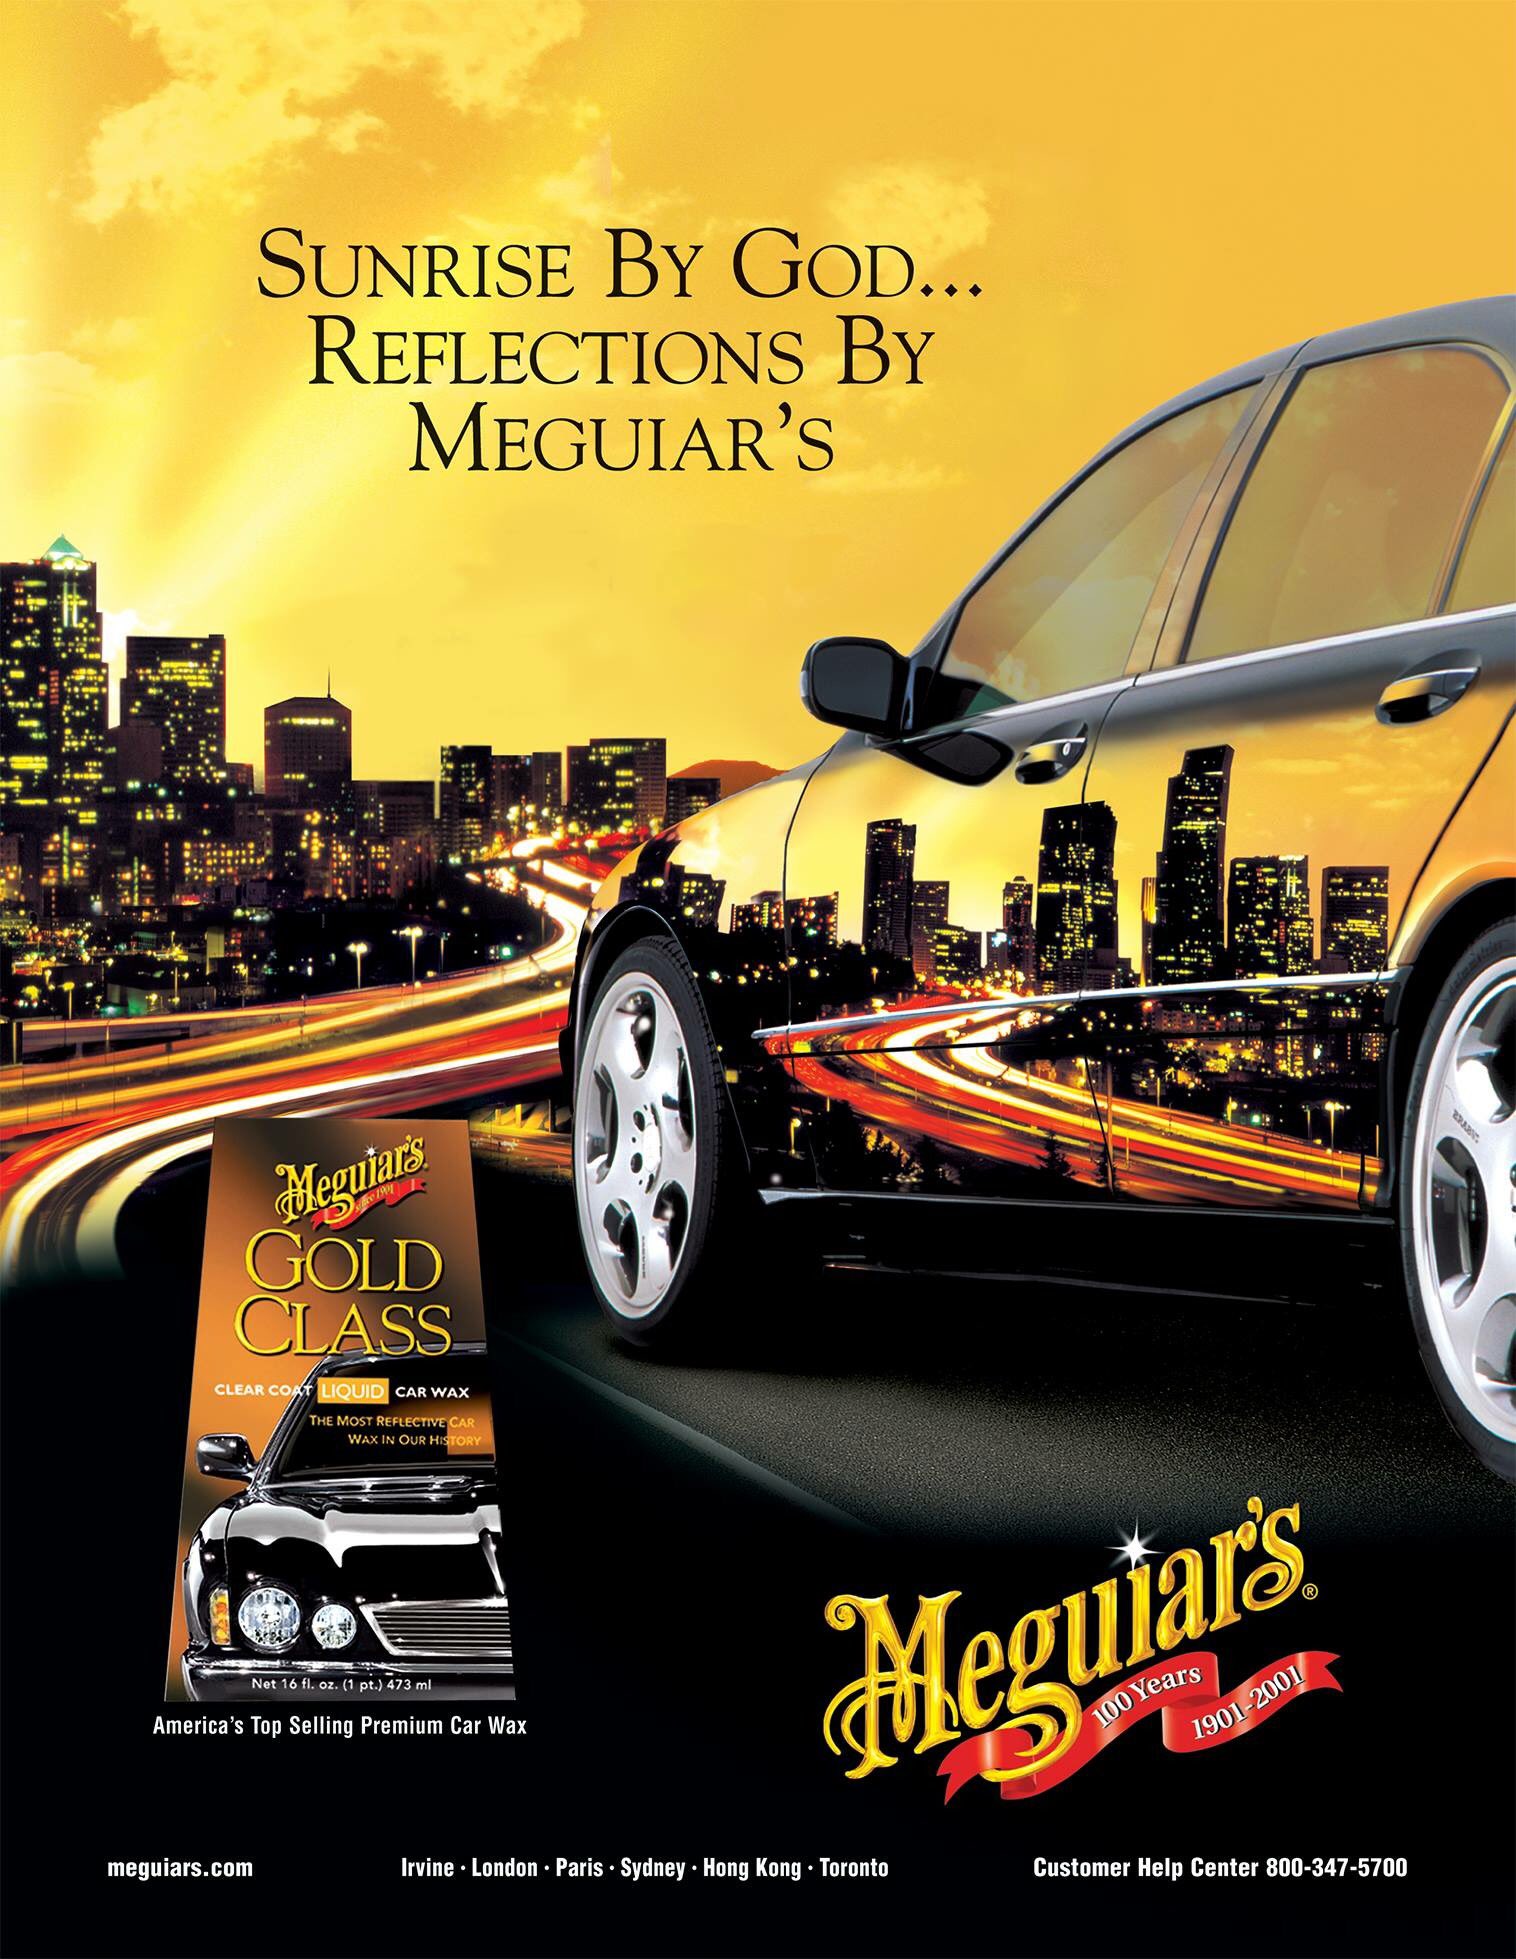 Meguiar's - Sometimes it's the perfect time for a classic